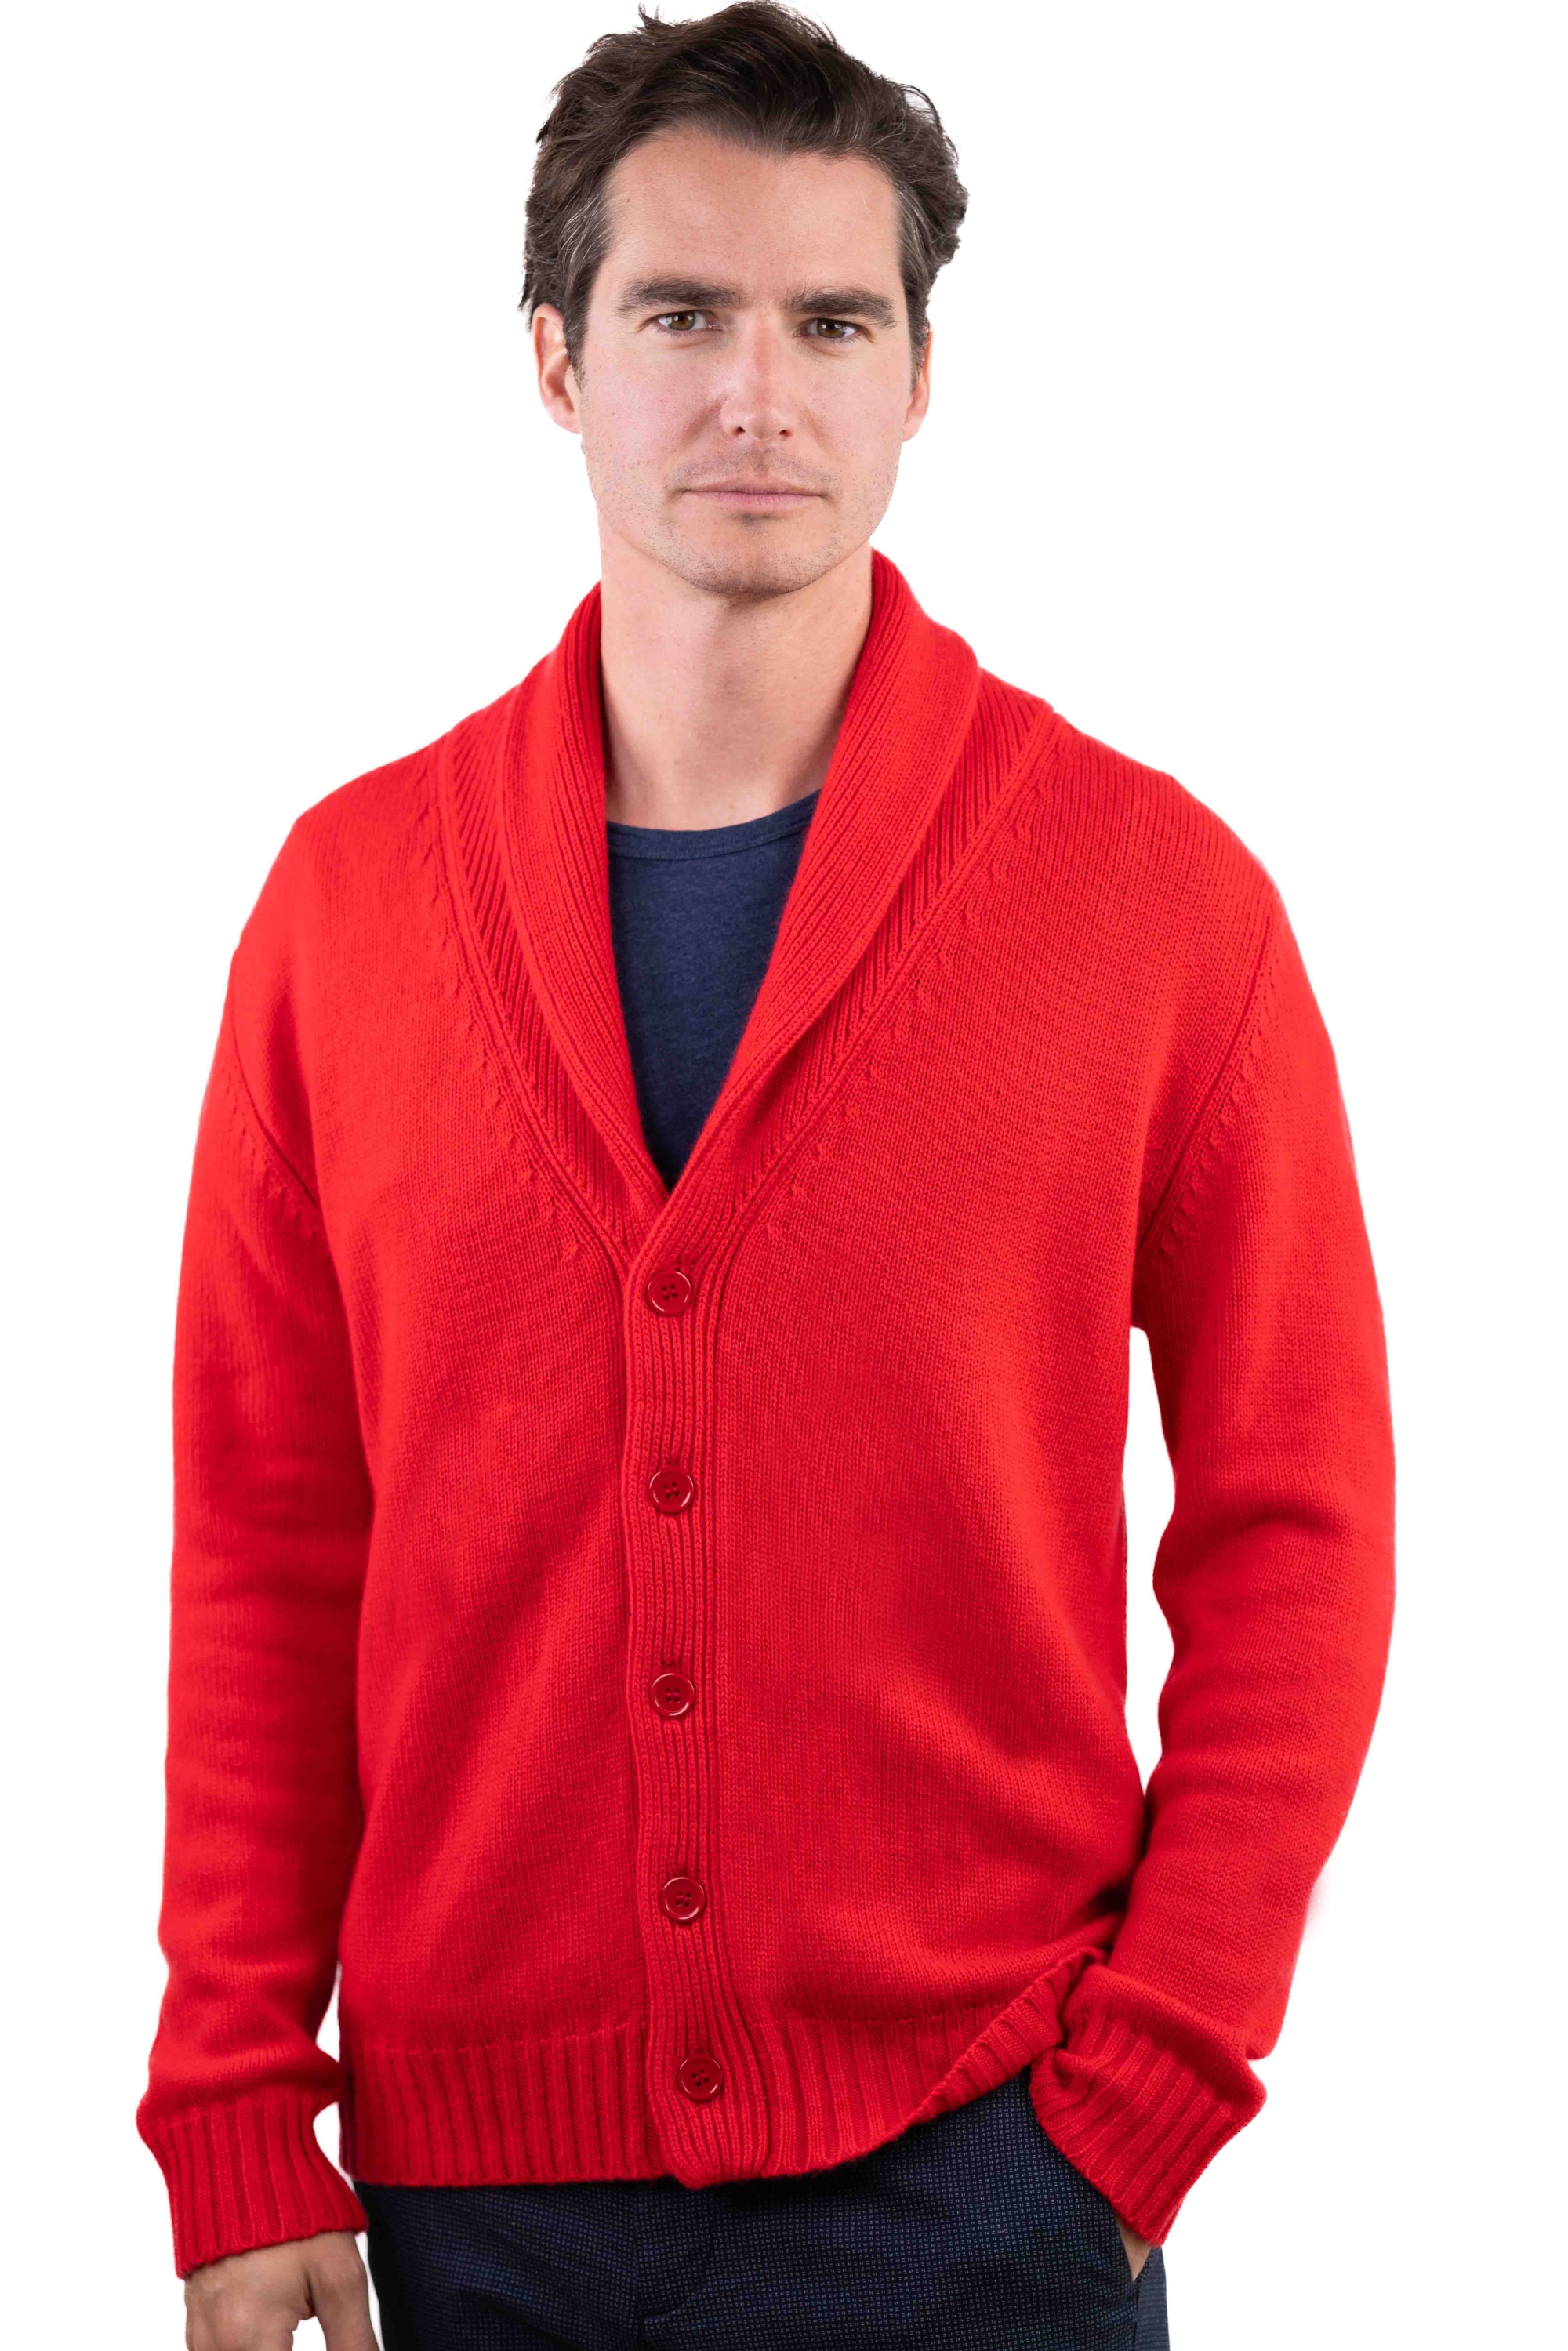 Cashmere men chunky sweater jovan rouge xl